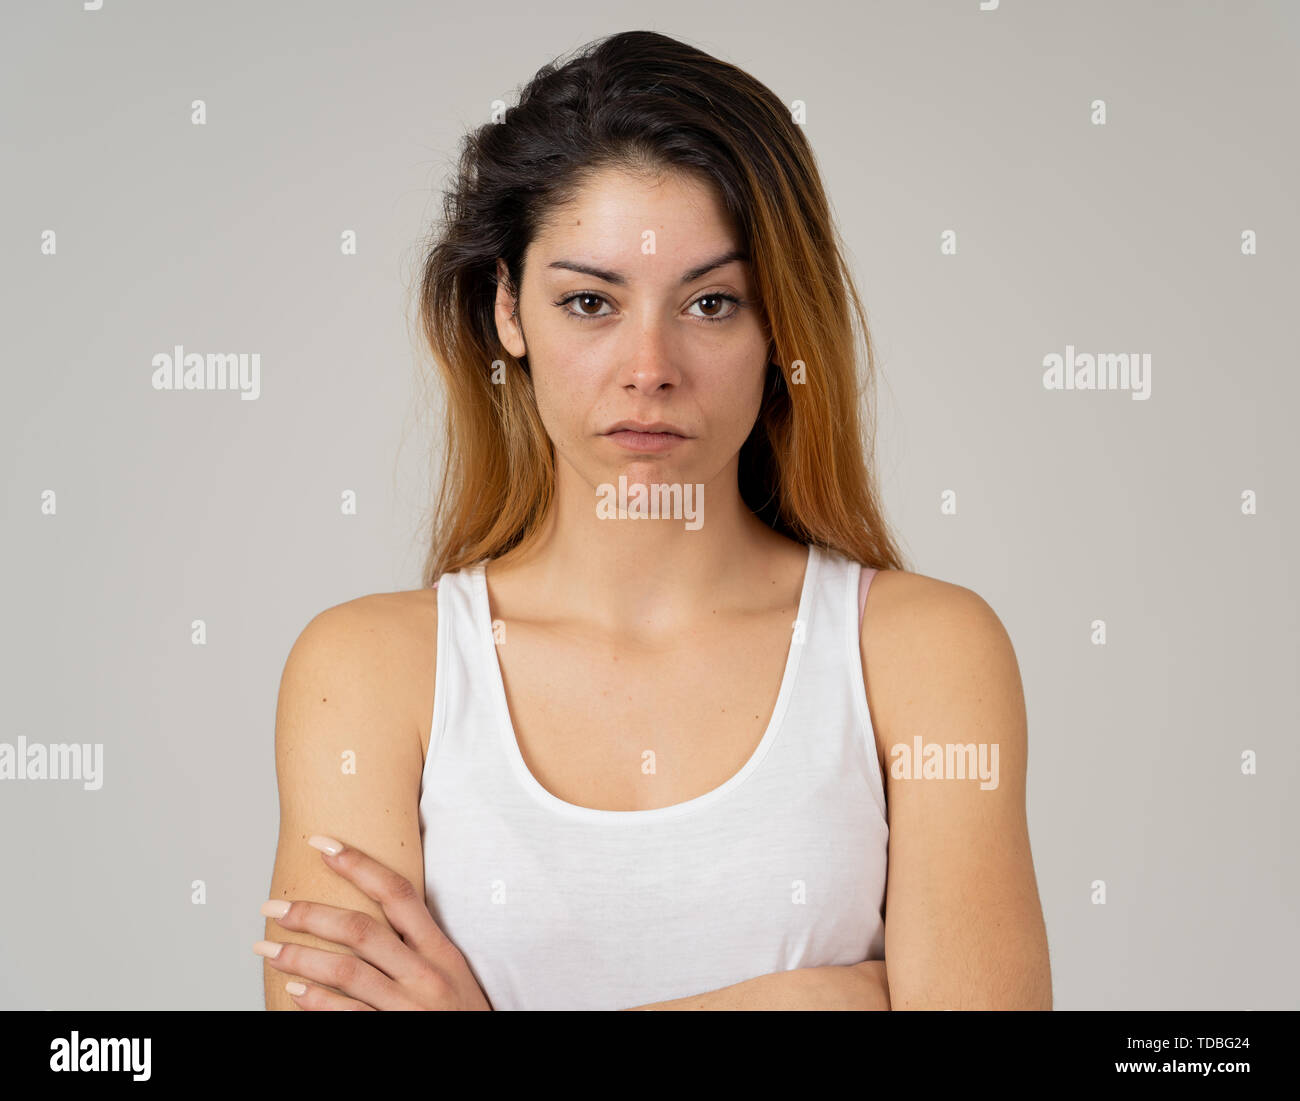 Facial expressions, emotions Anger. Young attractive caucasian woman with angry face. Looking mad and aggressive making furious gestures. Studio portr Stock Photo